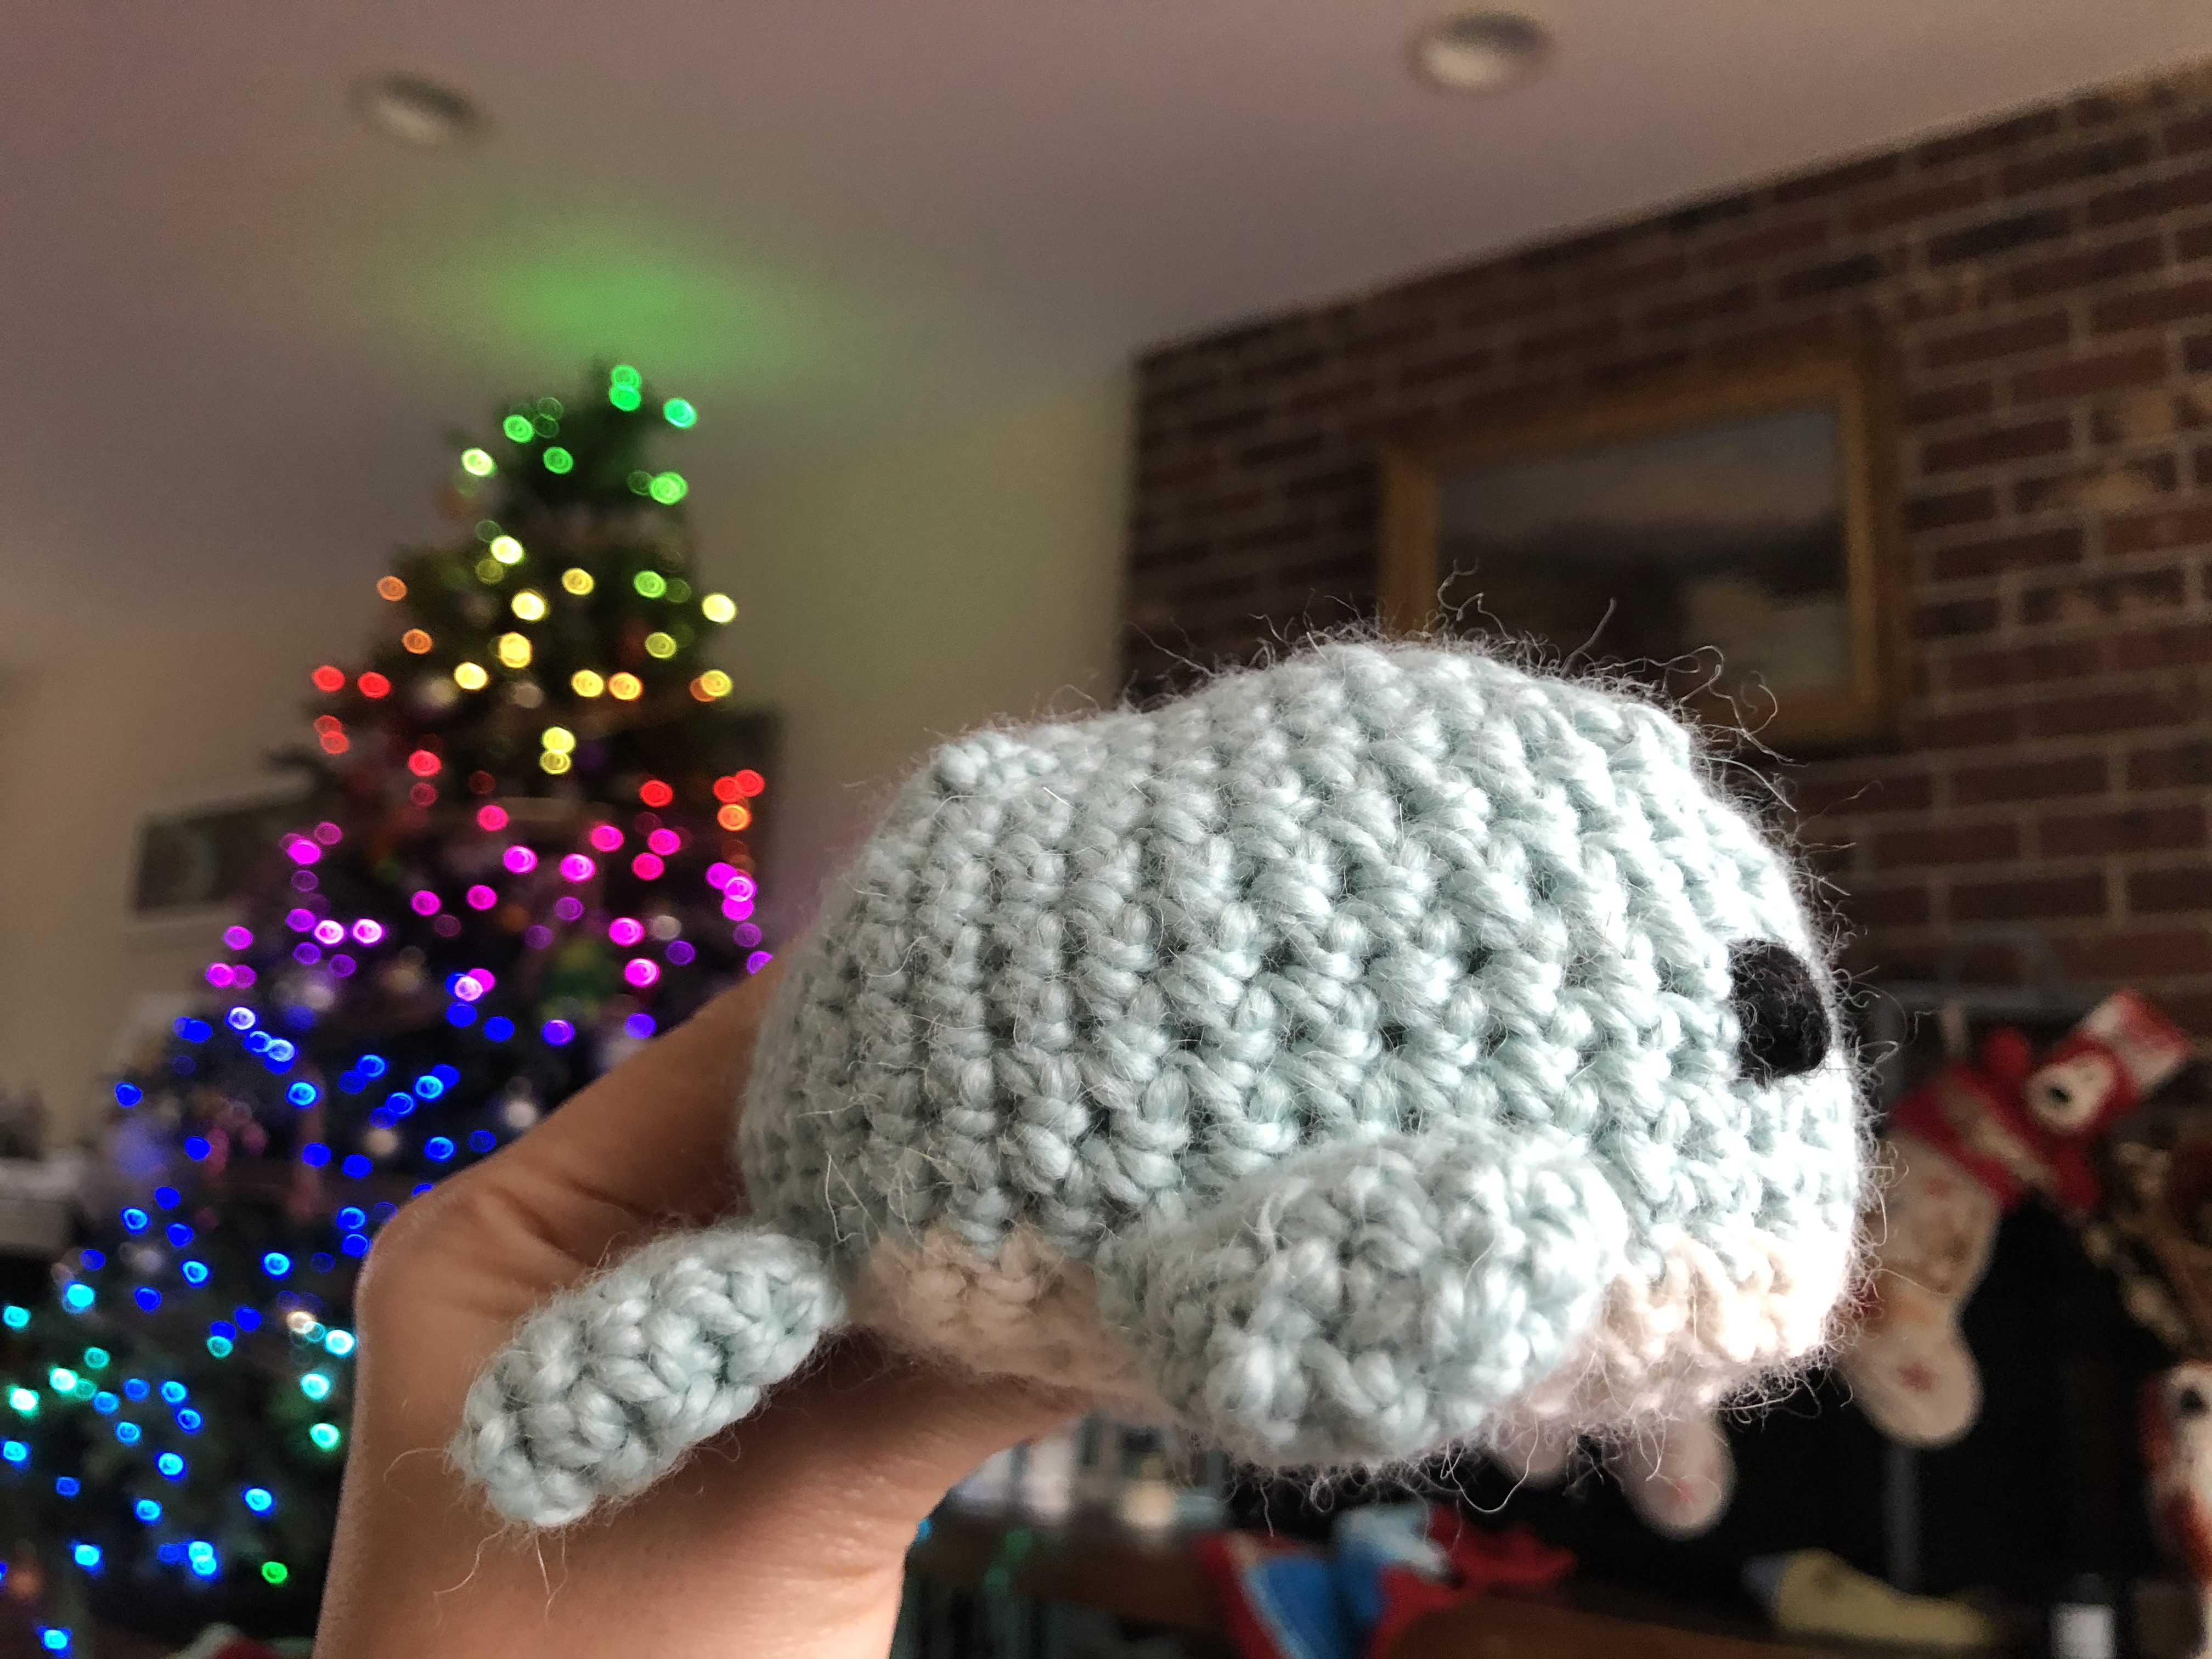 side view of blue and white crocheted amigurumi whale